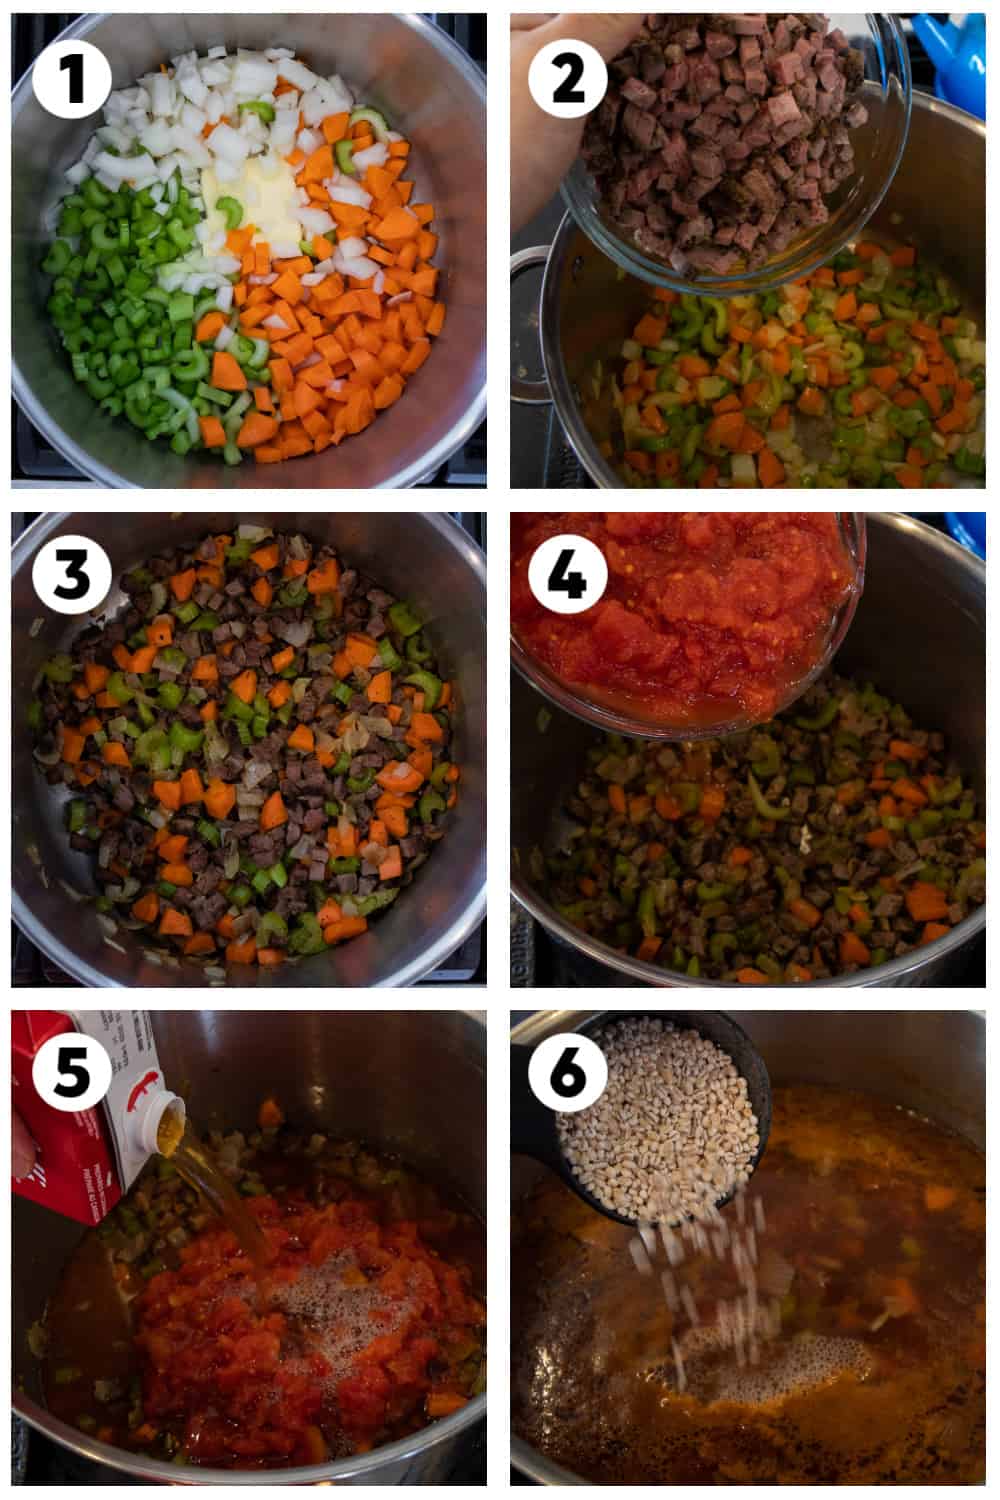 Step by step photos for how to make homemade soup